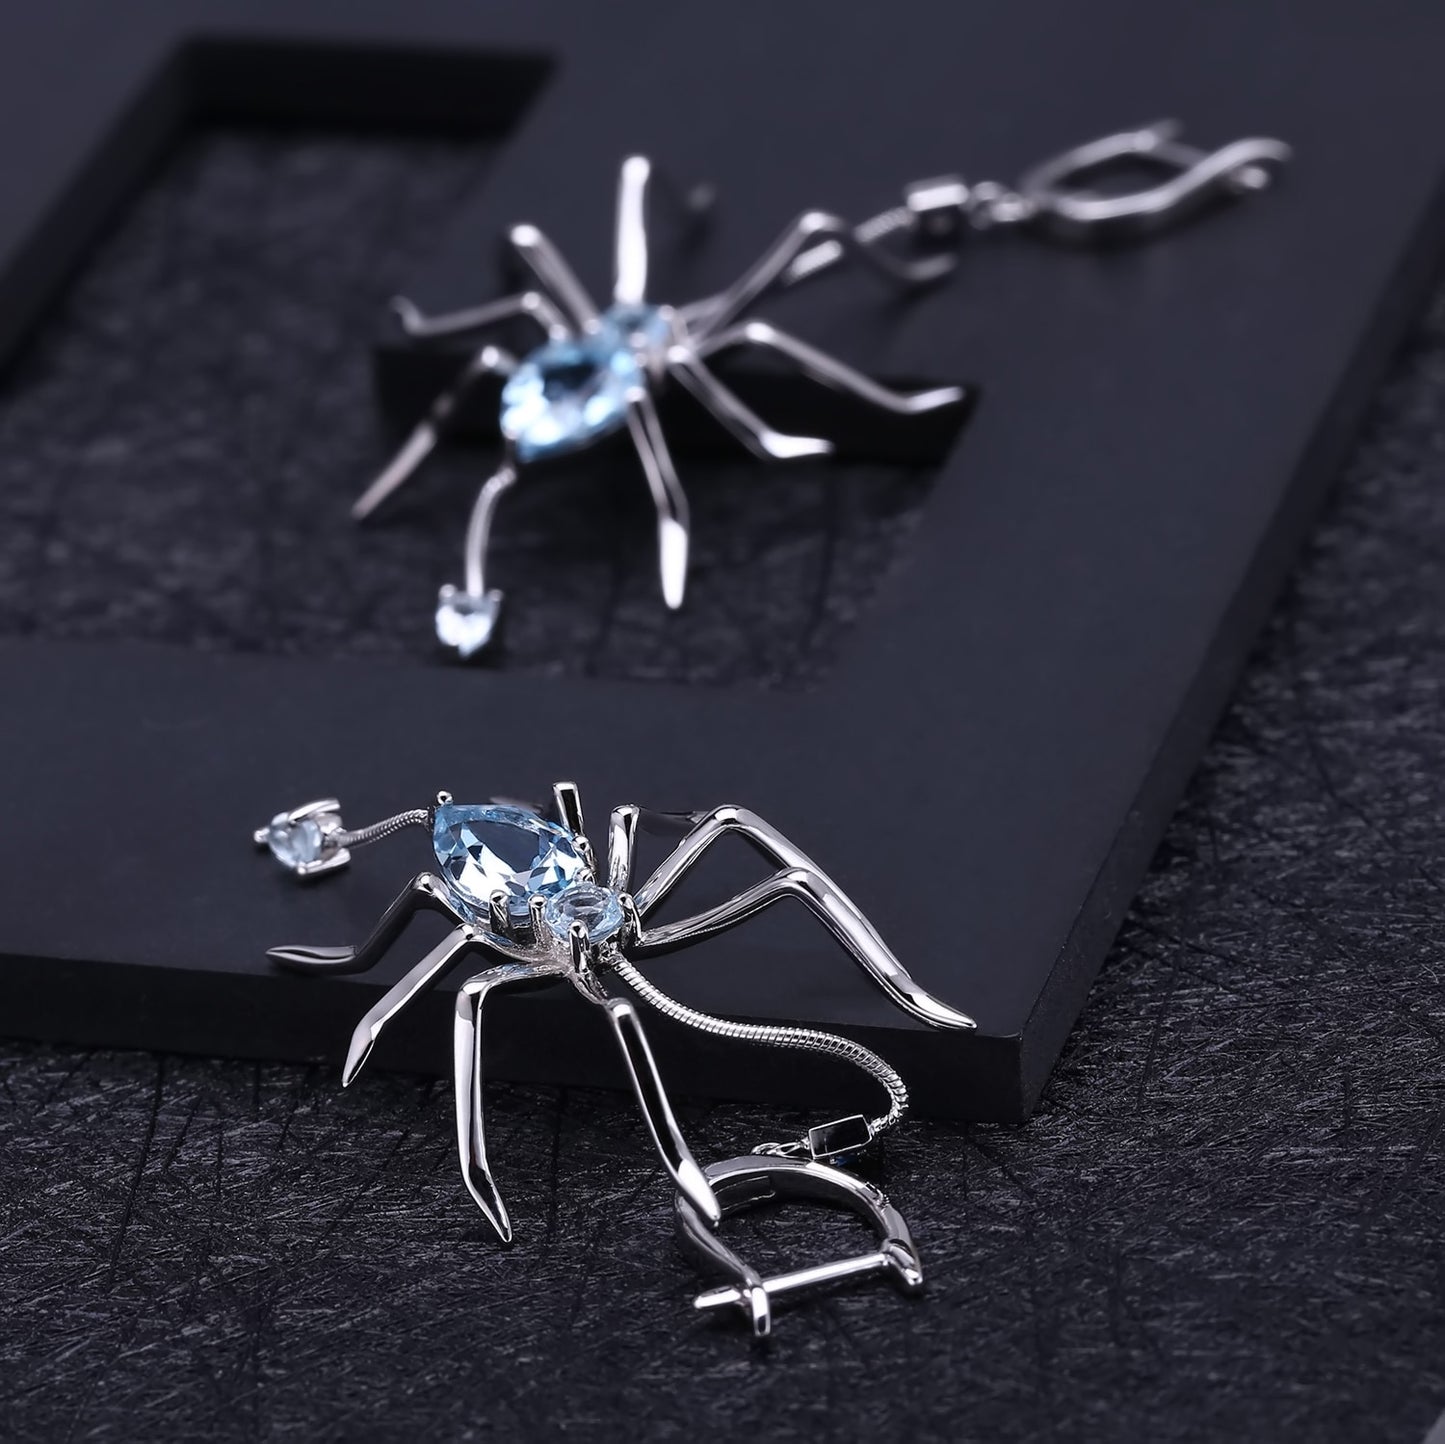 Spider Earrings in 925 Silver and Blue Topaz